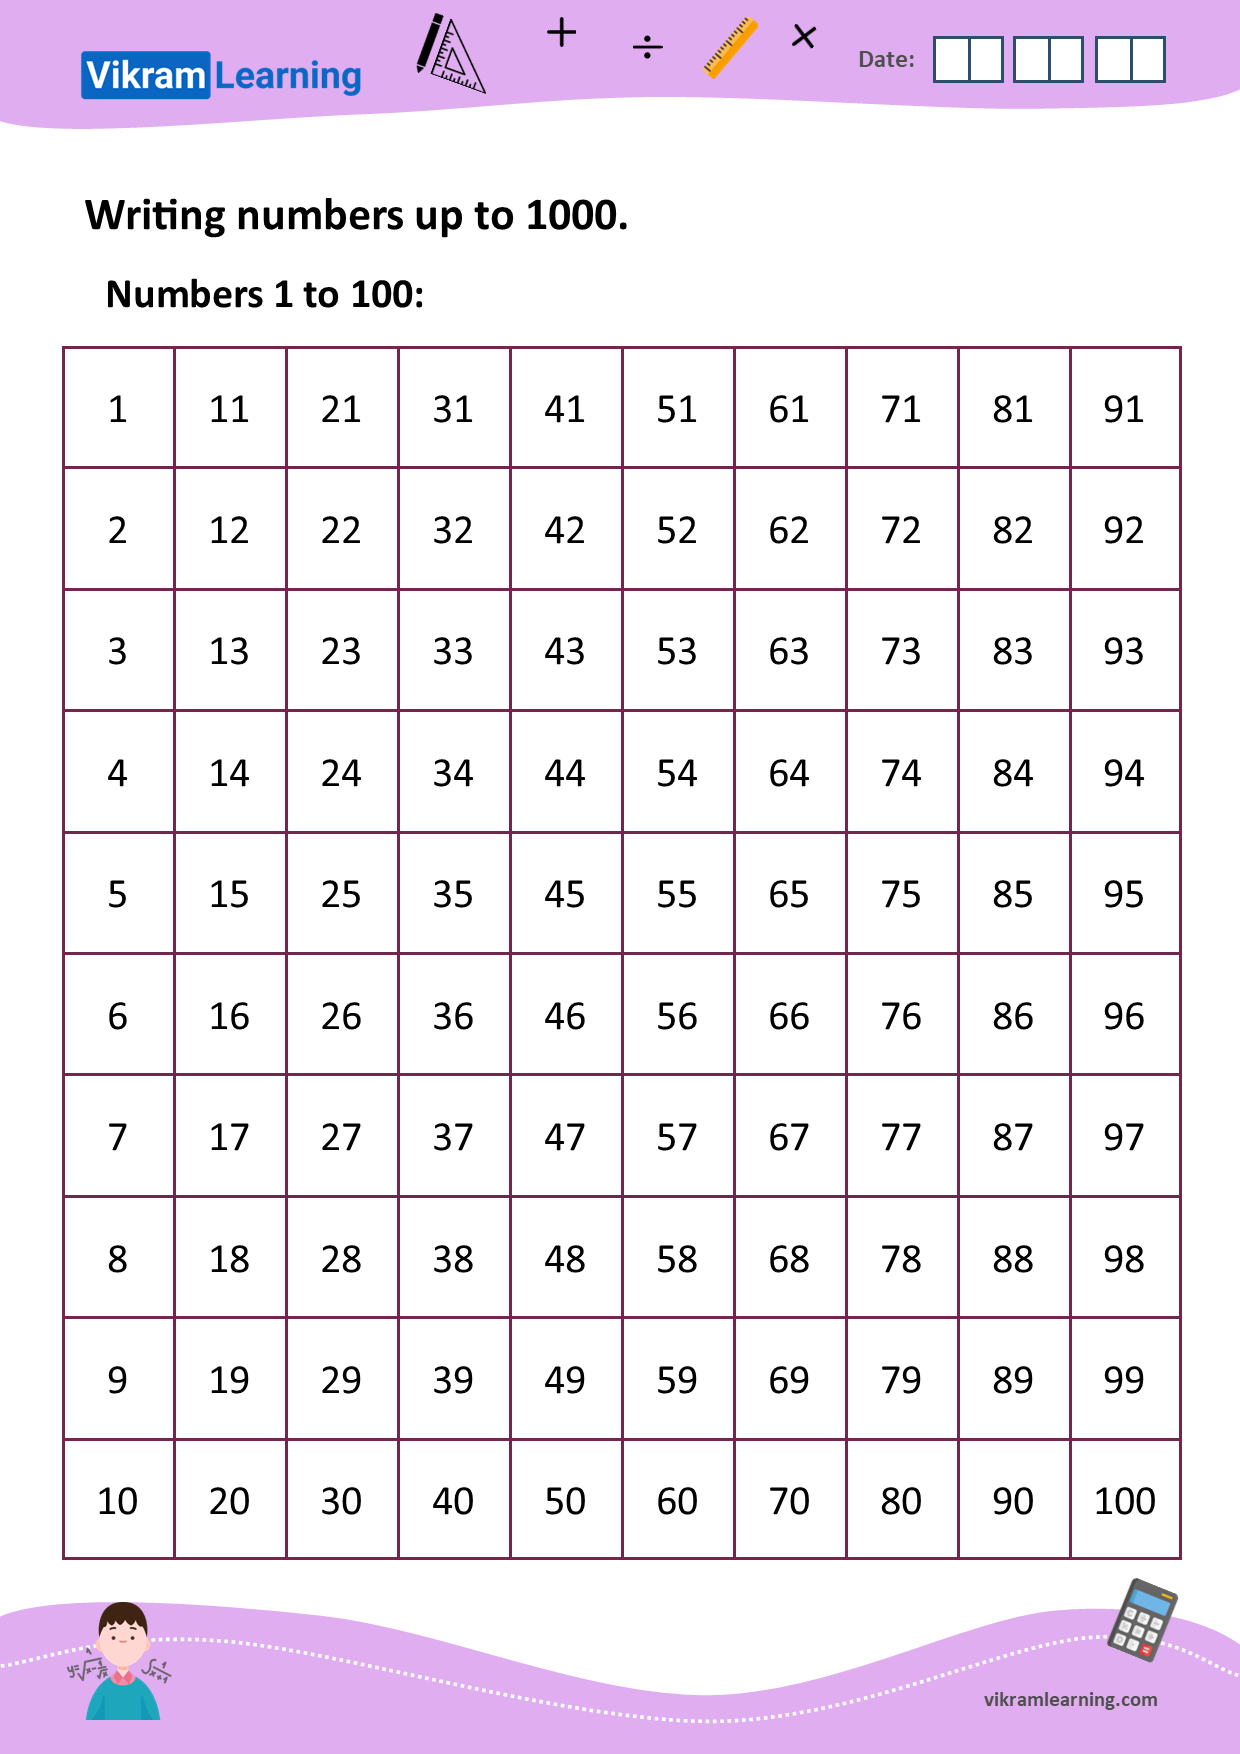 Download writing numbers up to 1000 worksheets